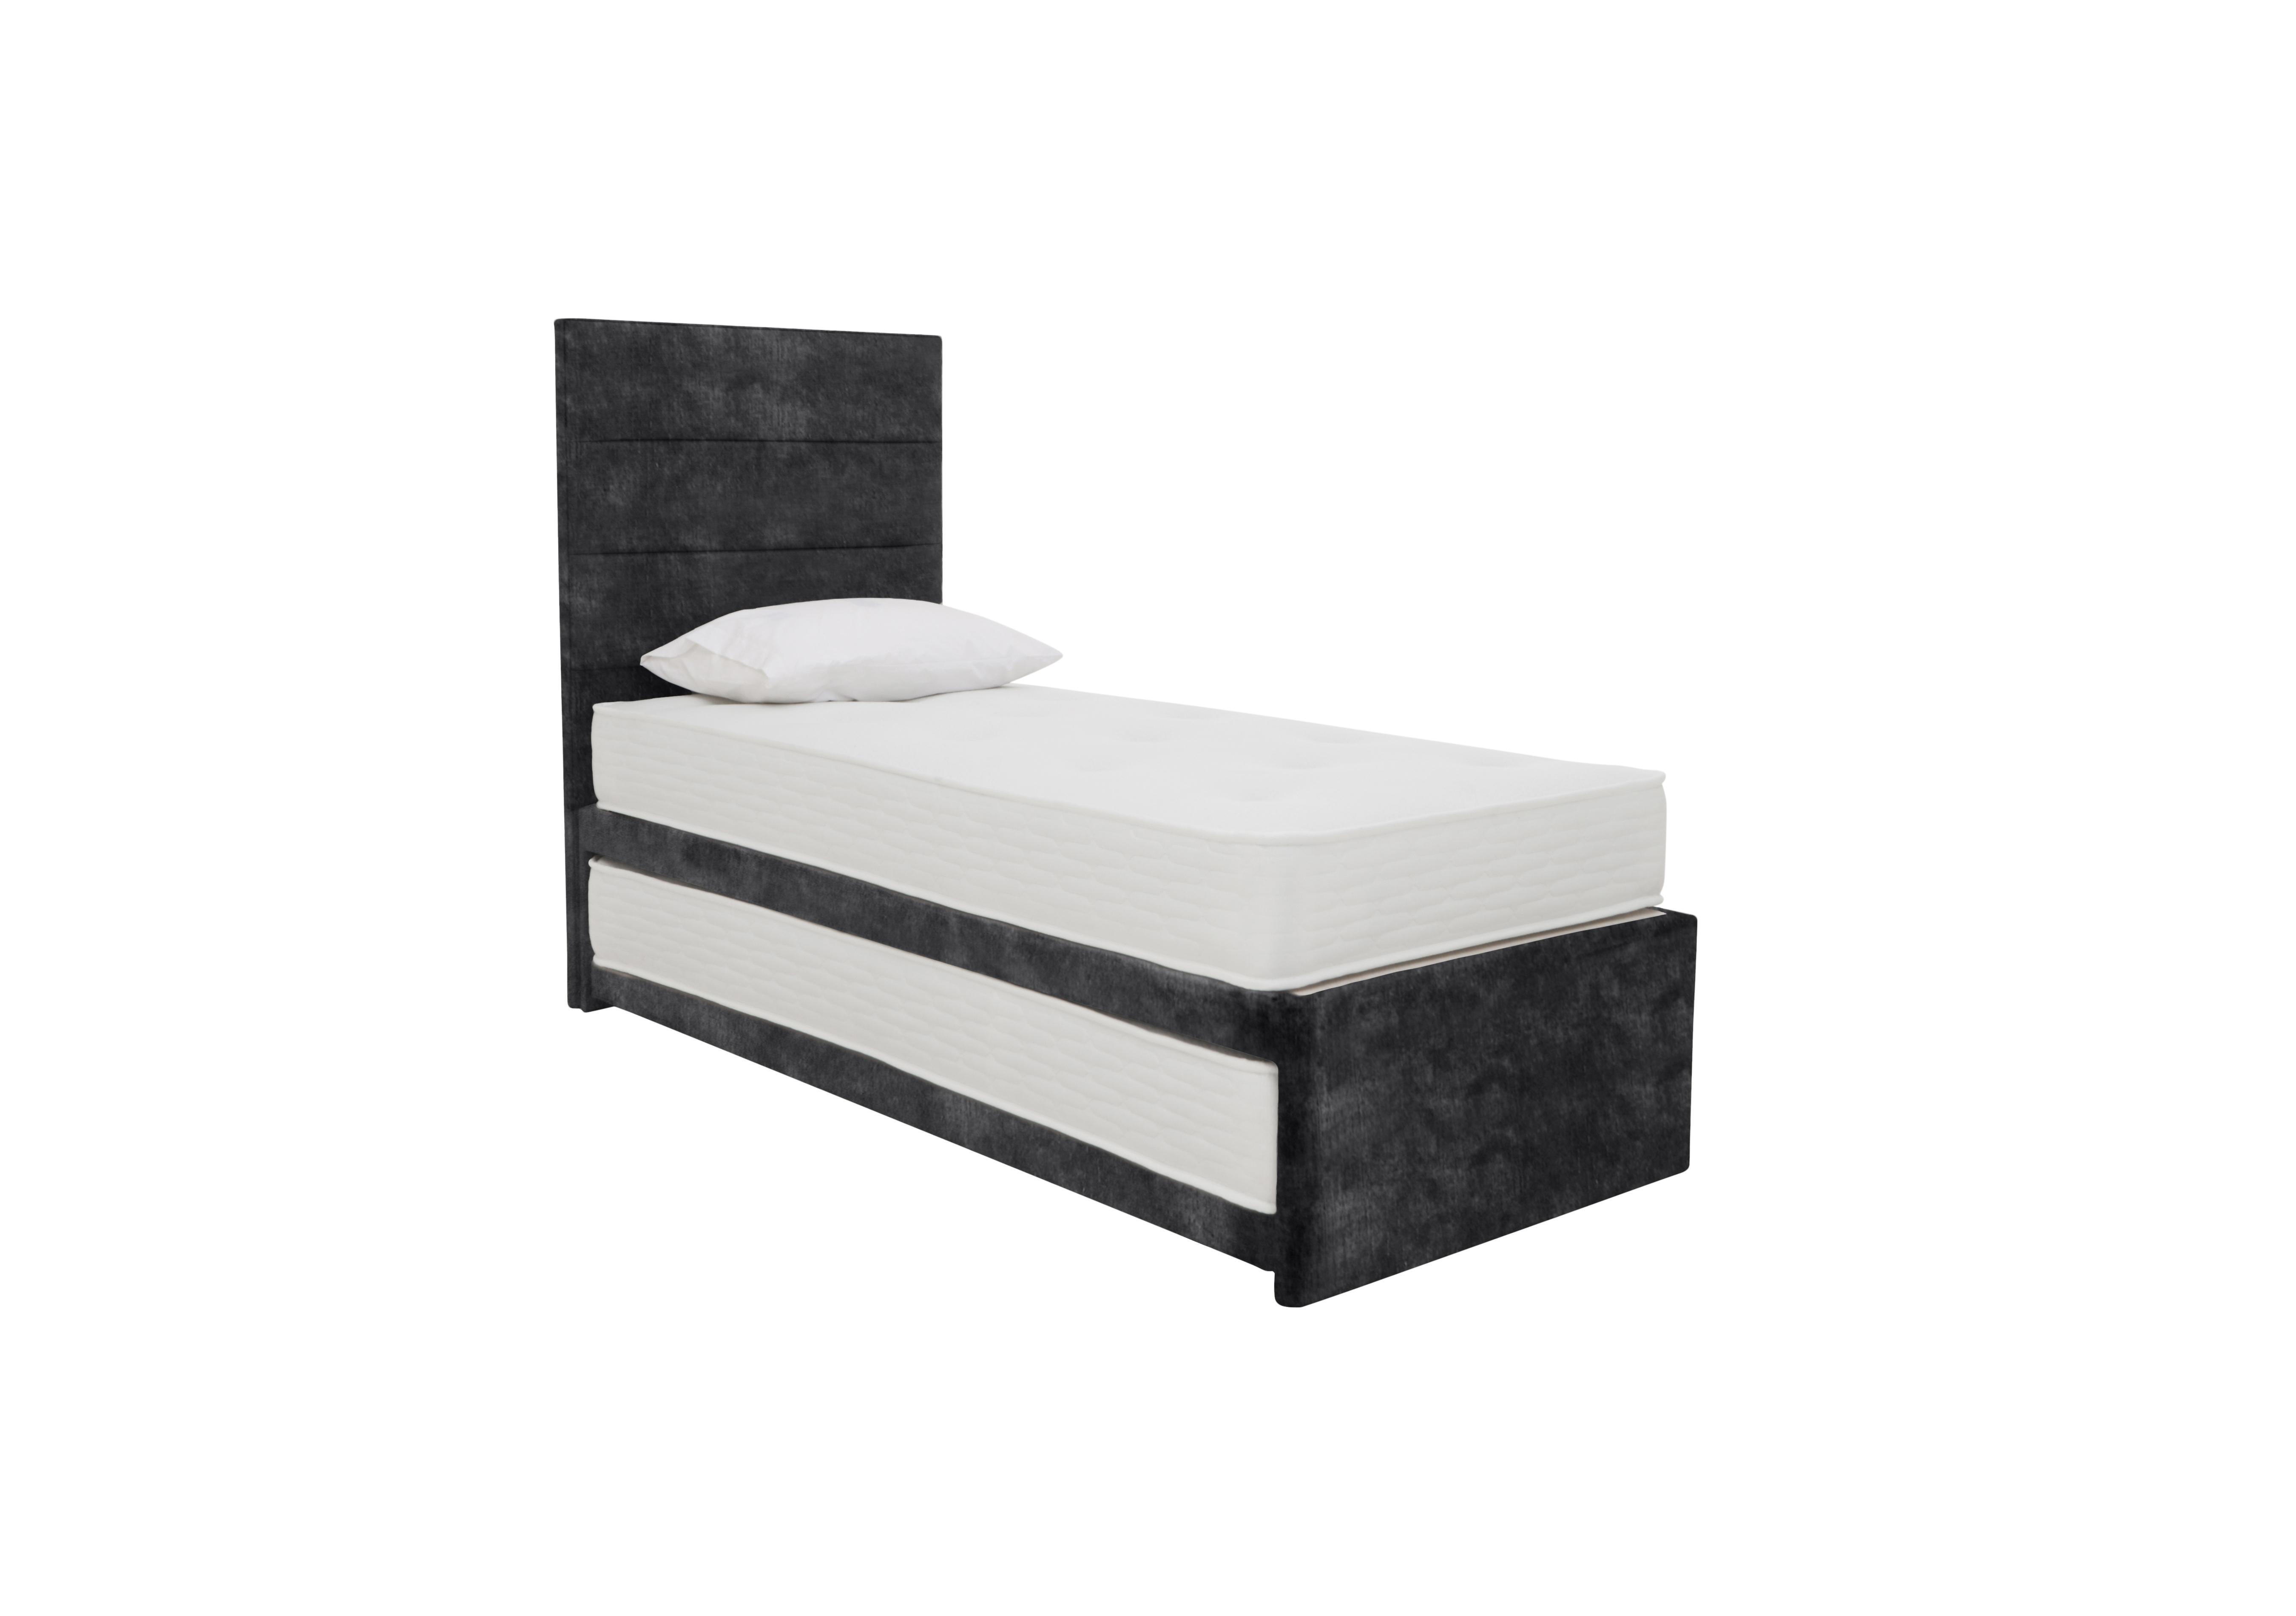 Guest Bed with Coil Mattress and Pocket Sprung Mattress in Lace Domino on Furniture Village